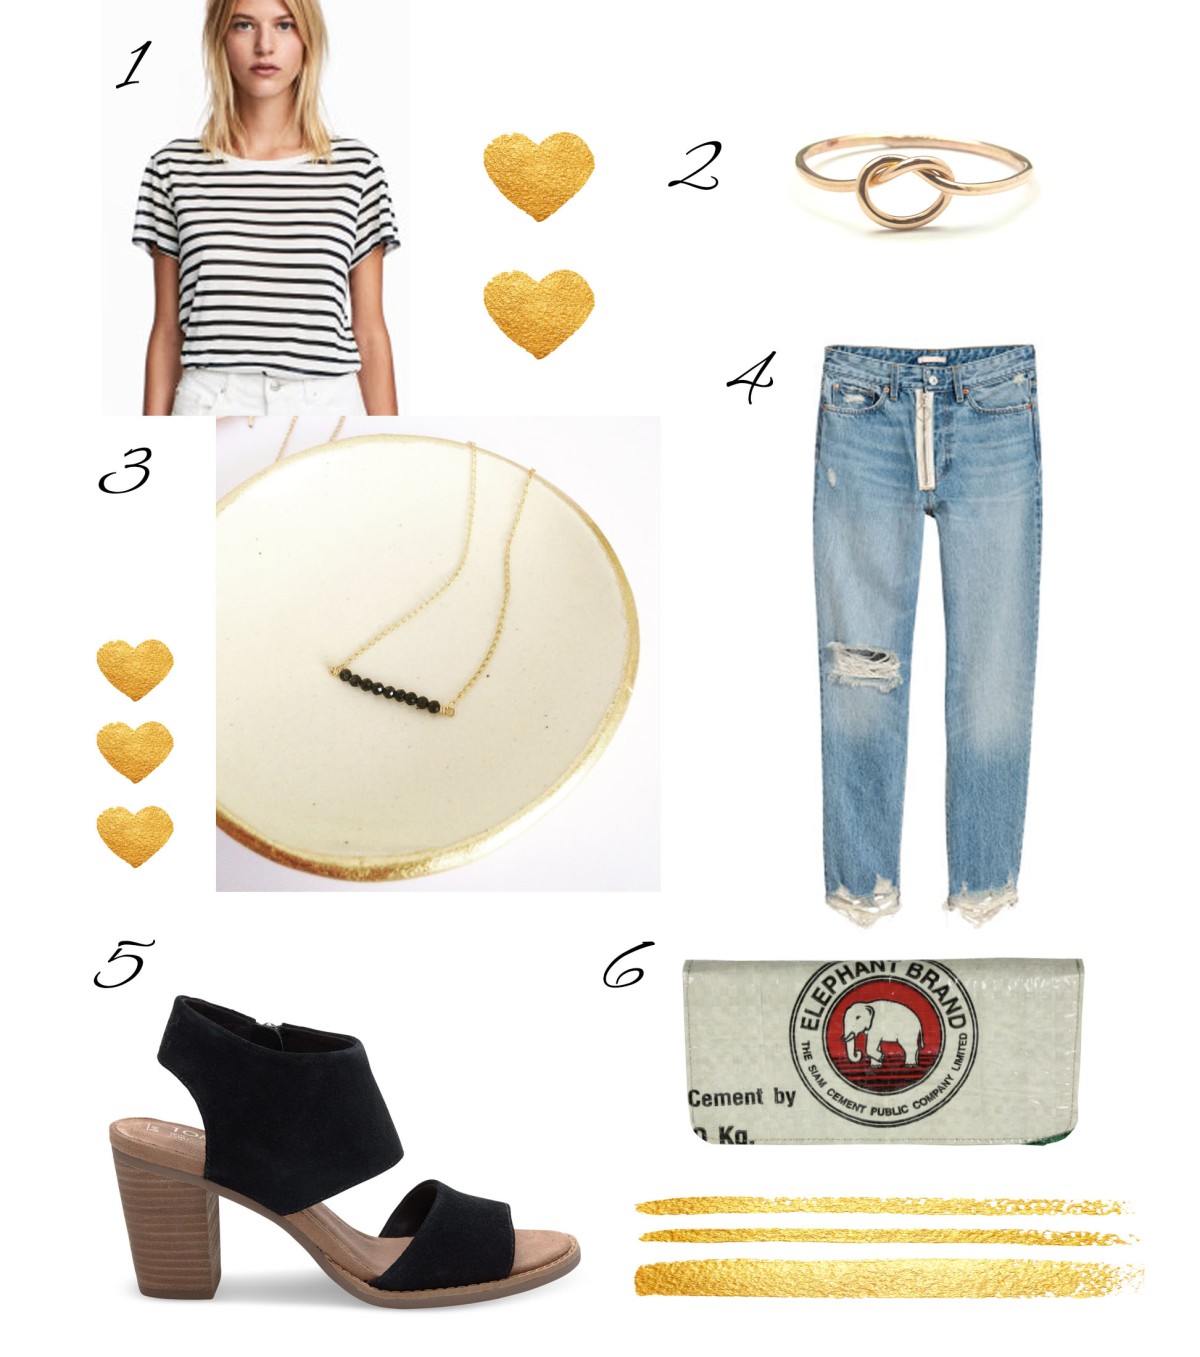 Thursday’s ethical style